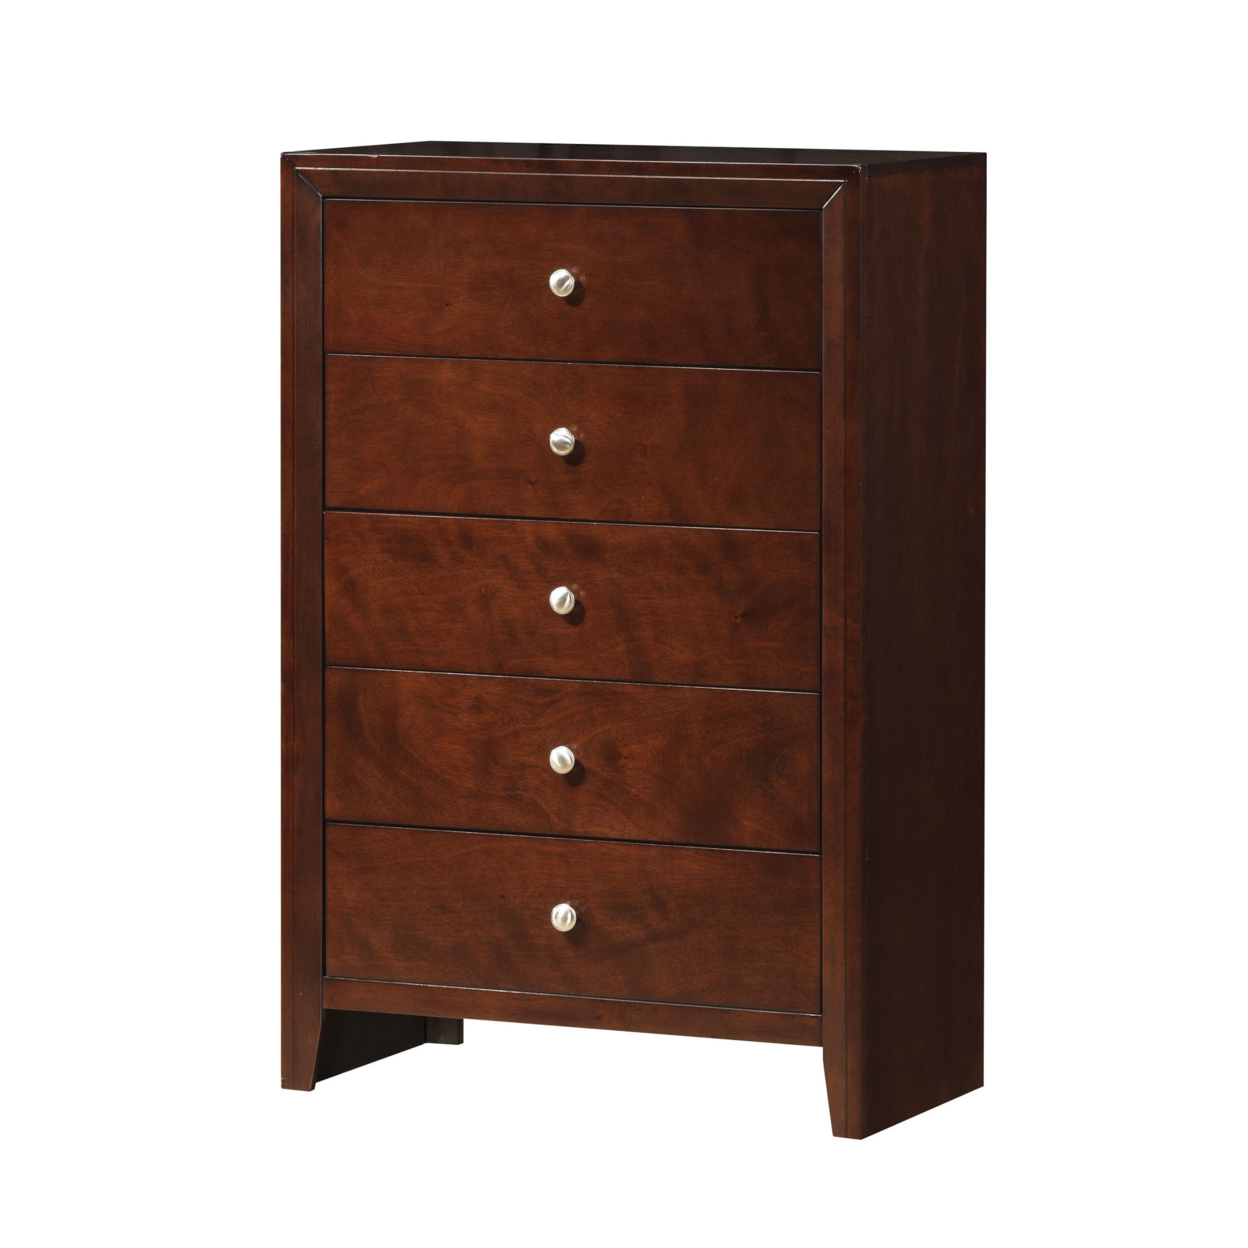 Contemporary Style Wooden Chest With 5 Storage Drawers, Brown- Saltoro Sherpi